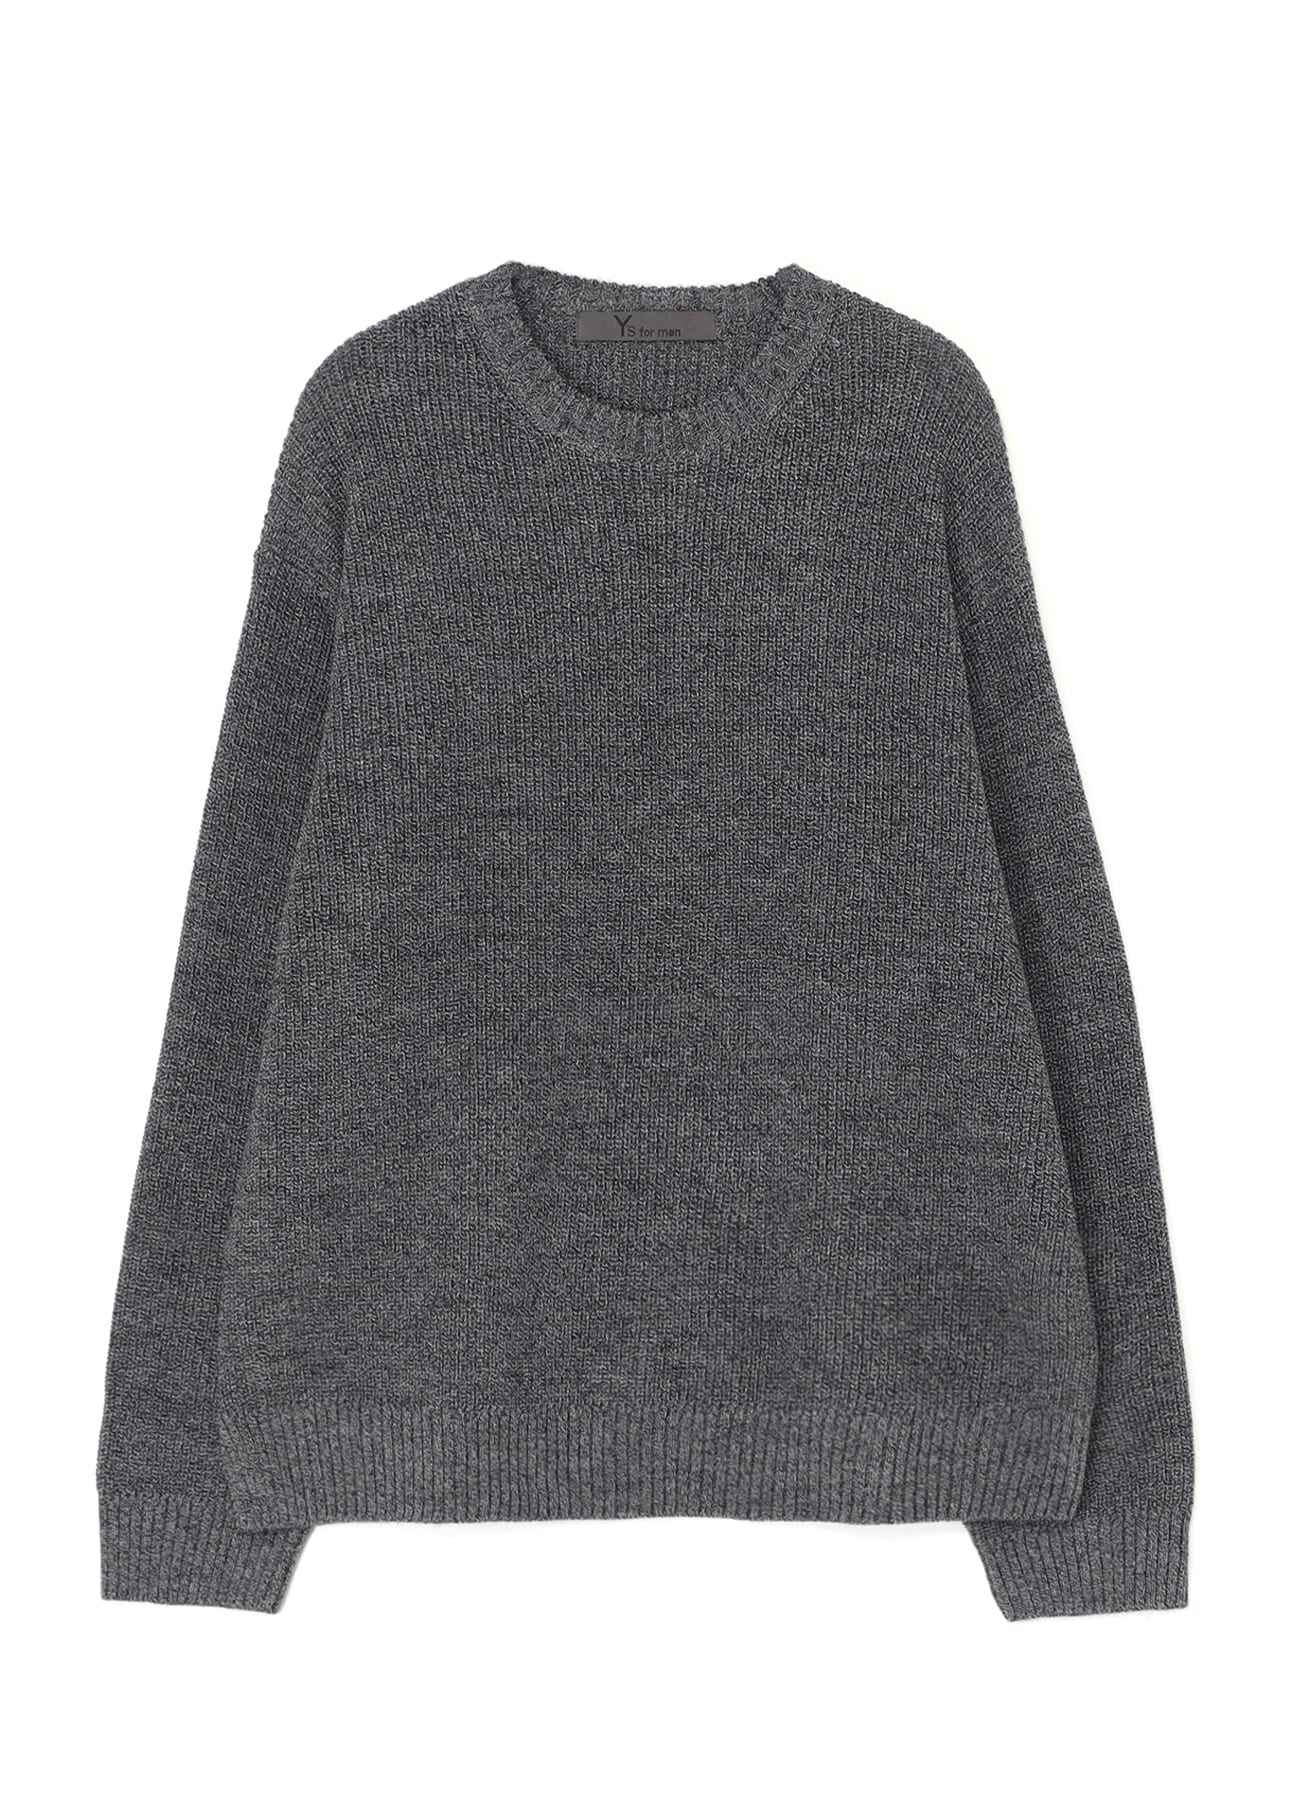 ROUND NECK KNIT WITH Y's for men LOGO PRINT(M GREY): Y's for men 